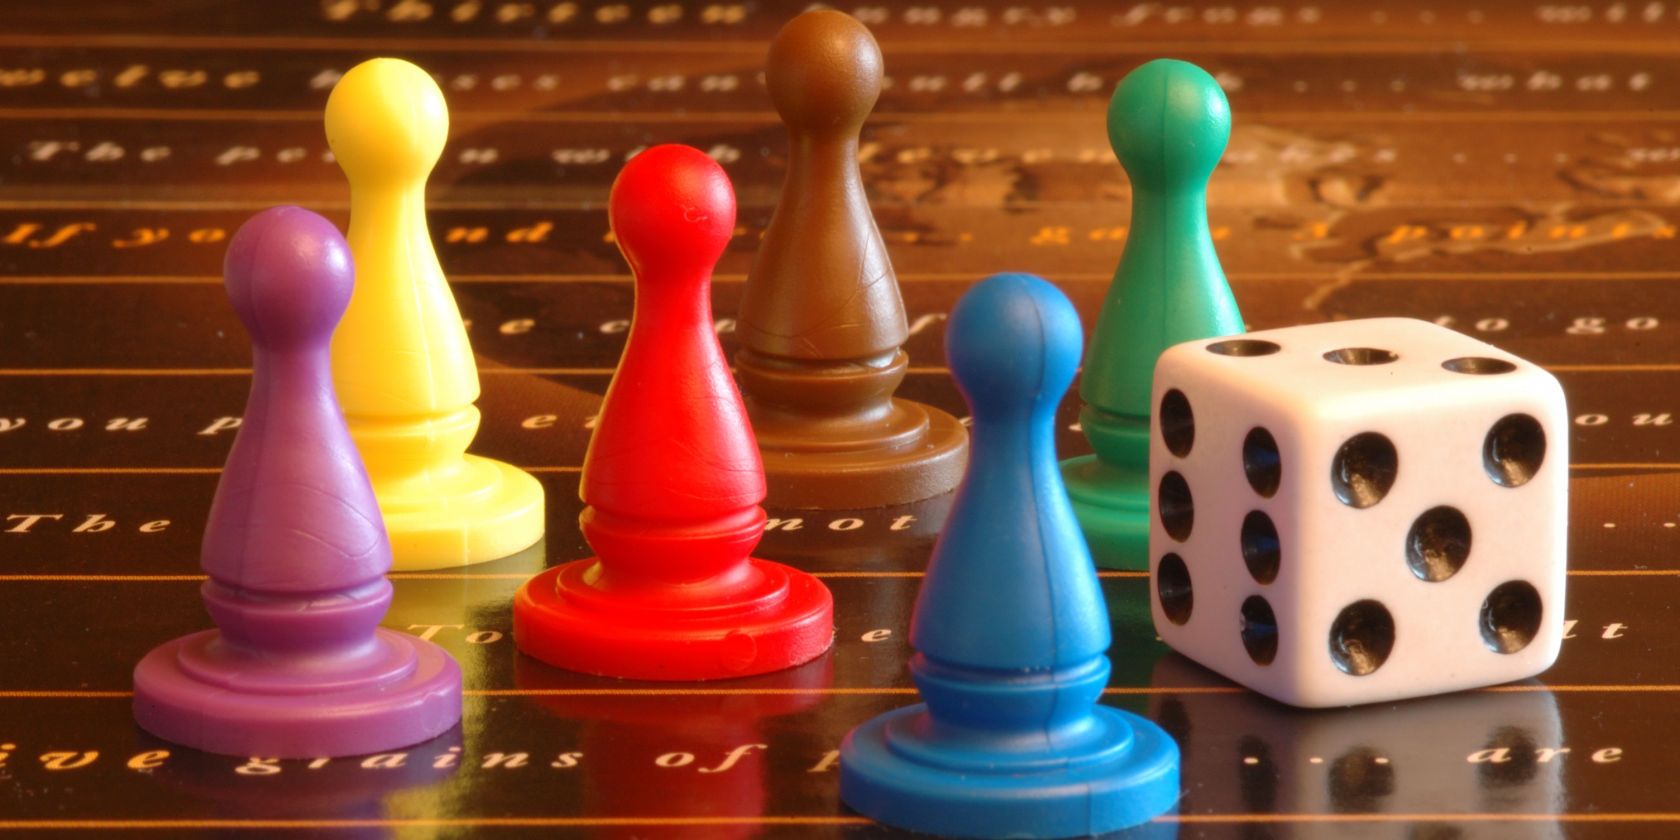 How to play board games online: play with friends or family over the web